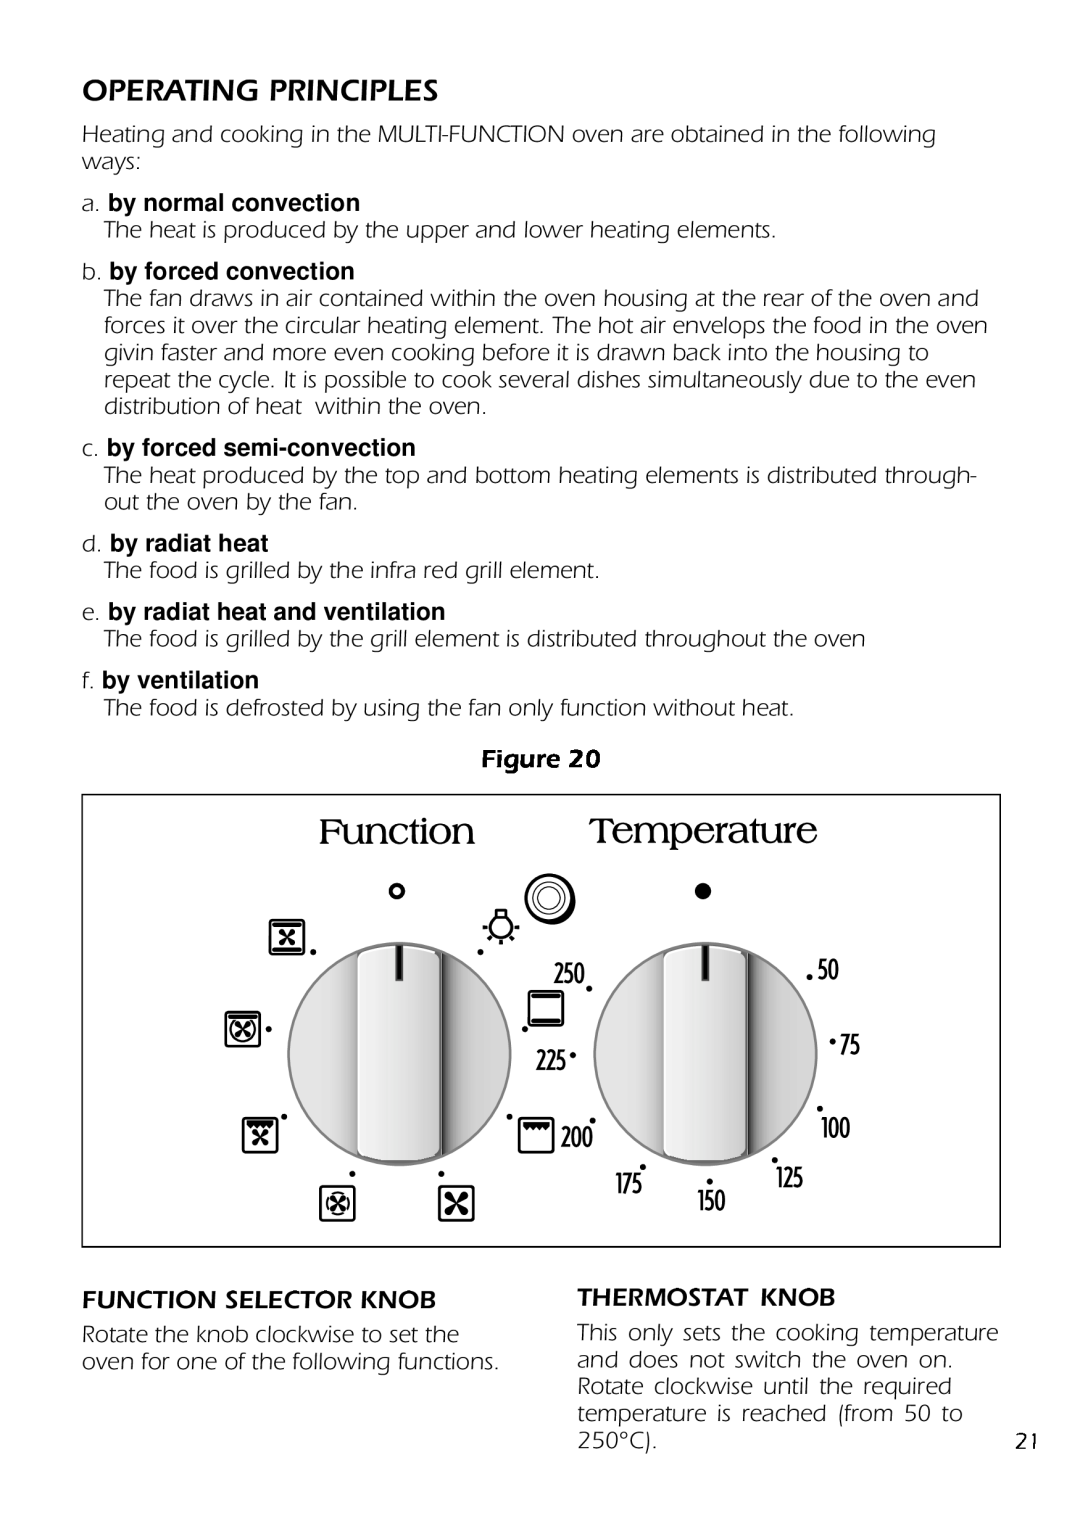 DeLonghi DS 61 GW Operating Principles, a. by normal convection, b. by forced convection, c. by forced semi-convection 